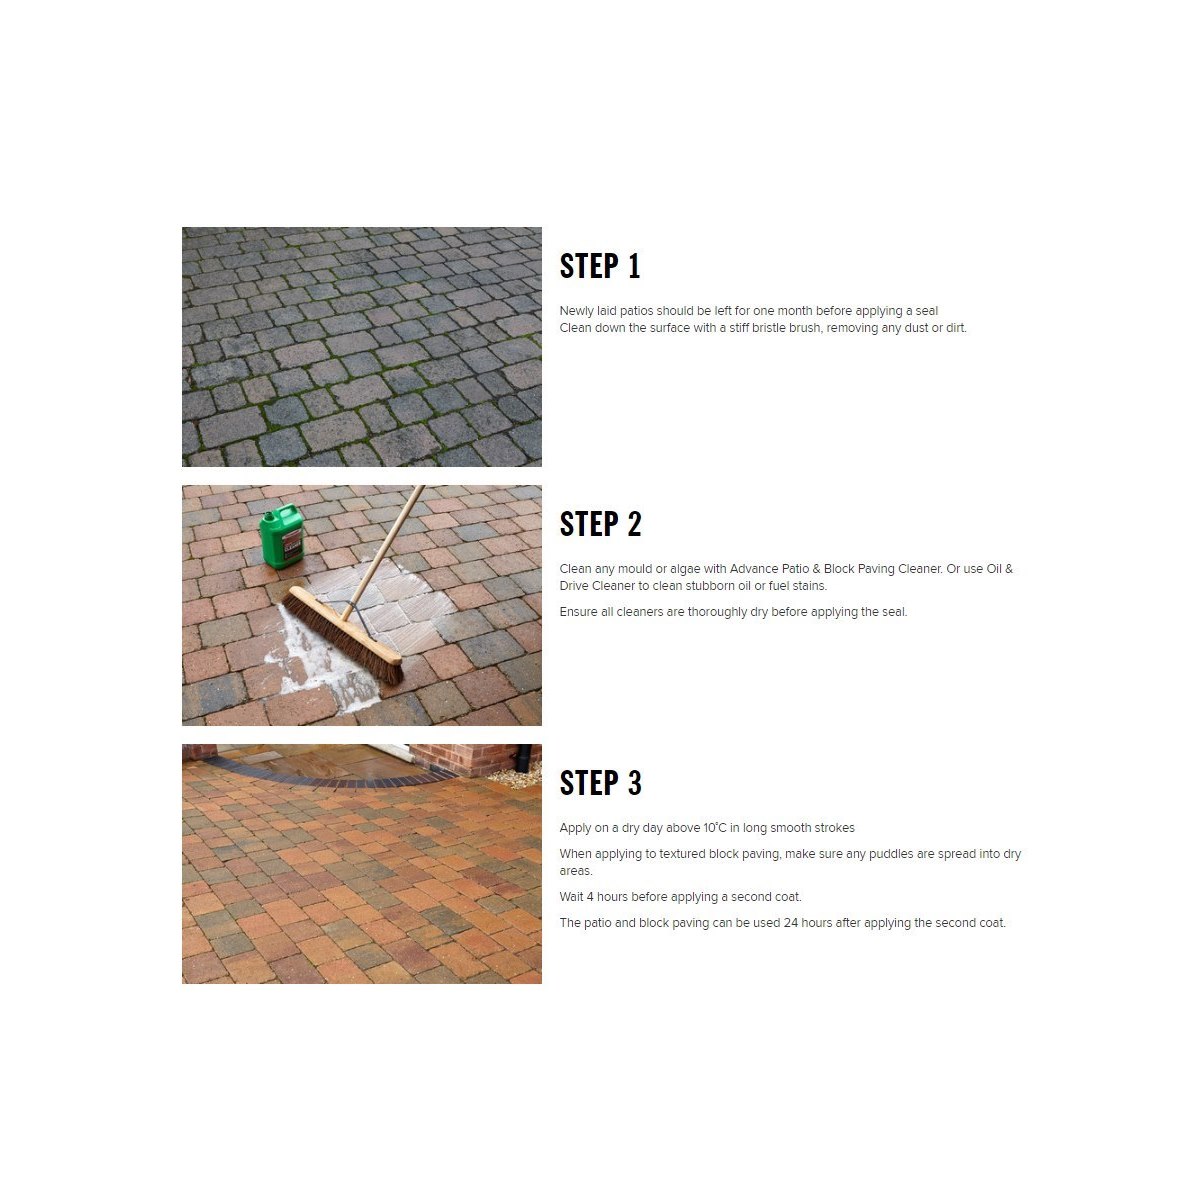 Thompson's Patio and Block Paving Seal Usage Instructions